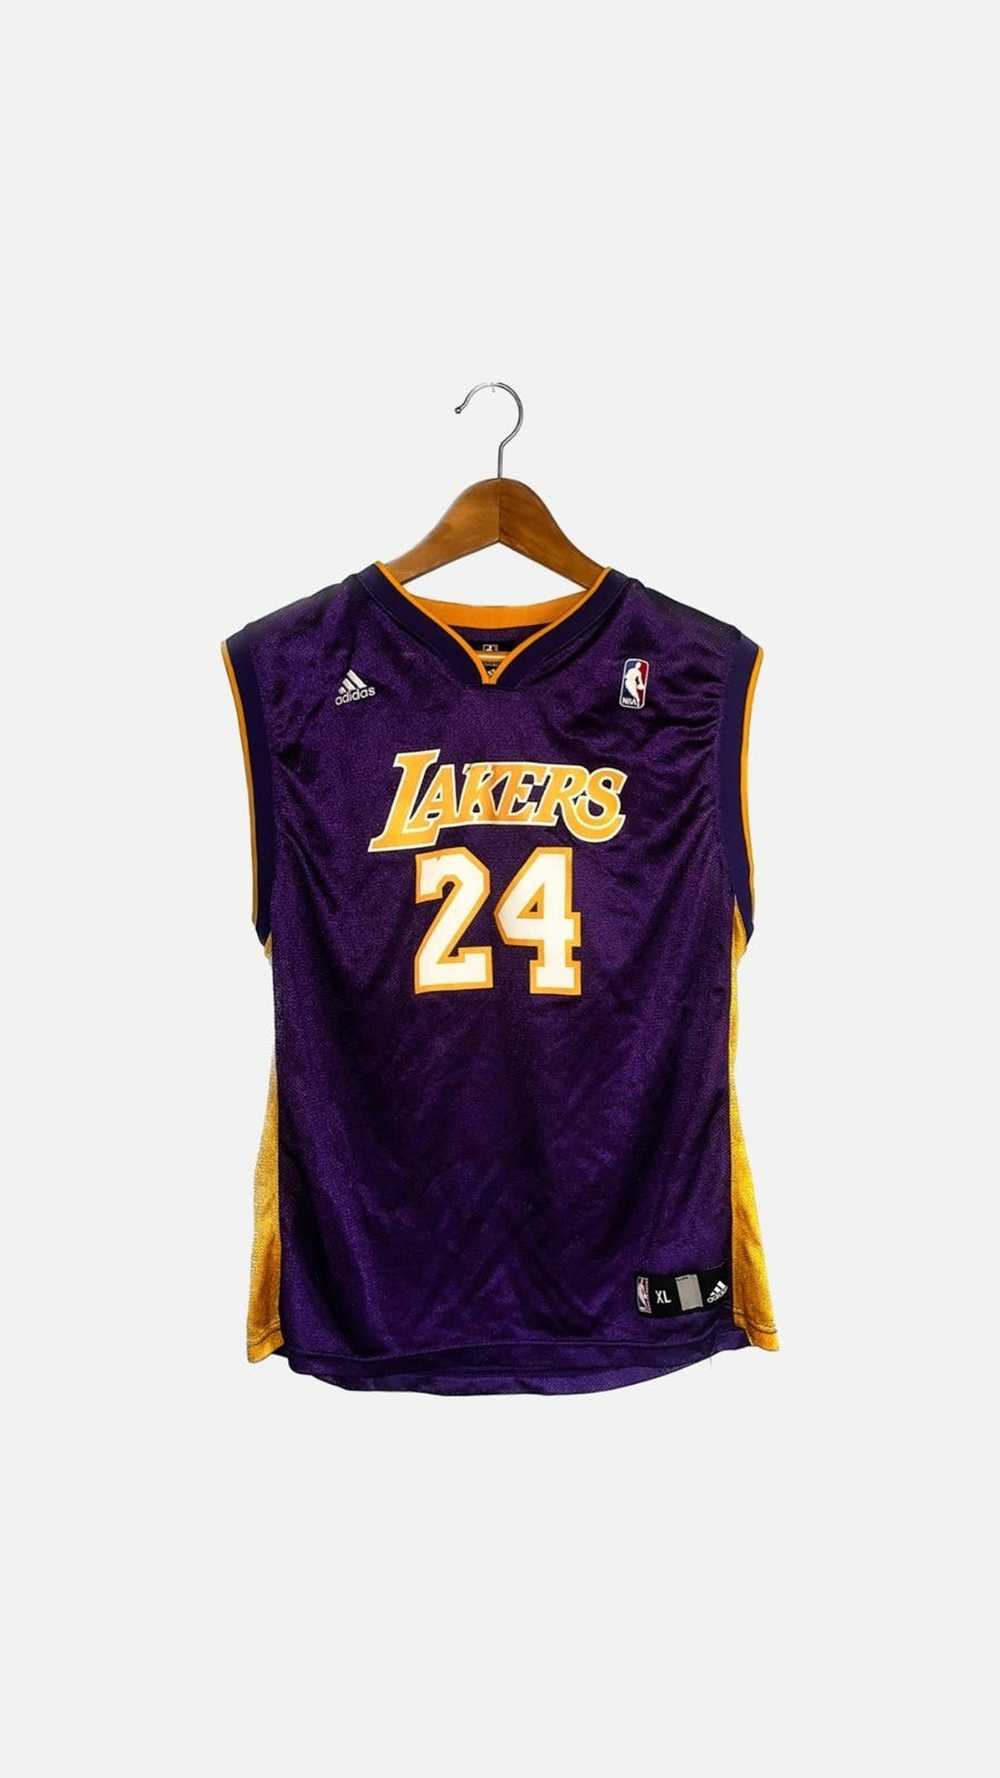  Men's Basketball Jersey-NBA Los Angeles Lakers Number 23  Lebron James Retro Basketball T-Shirt Yellow Short Sleeve Breathable Quick  Dry Adult Kids Basketball Sports (3XL) : Hobbies